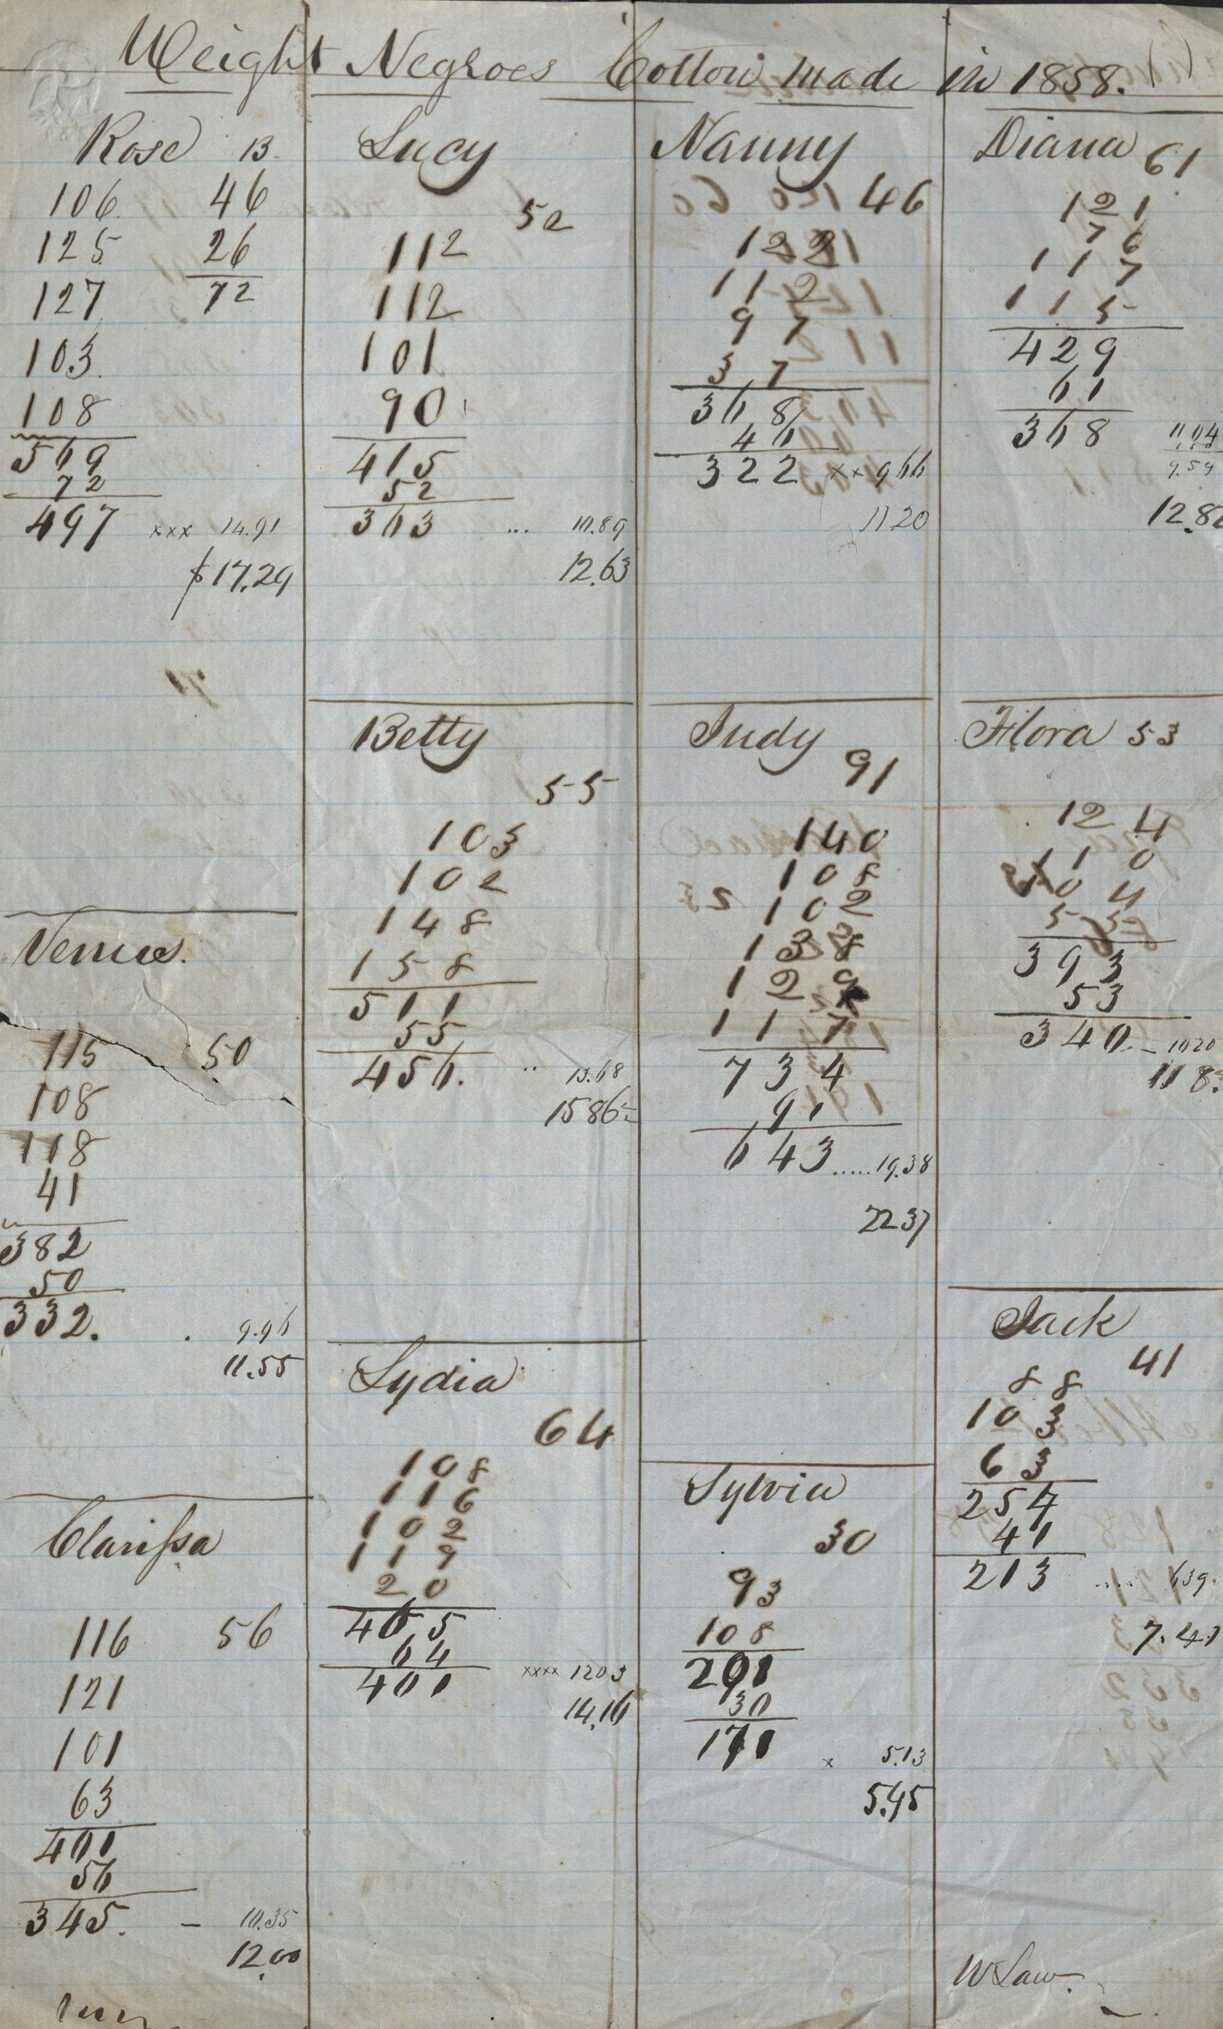 A page from William Law's Plantation Account Book